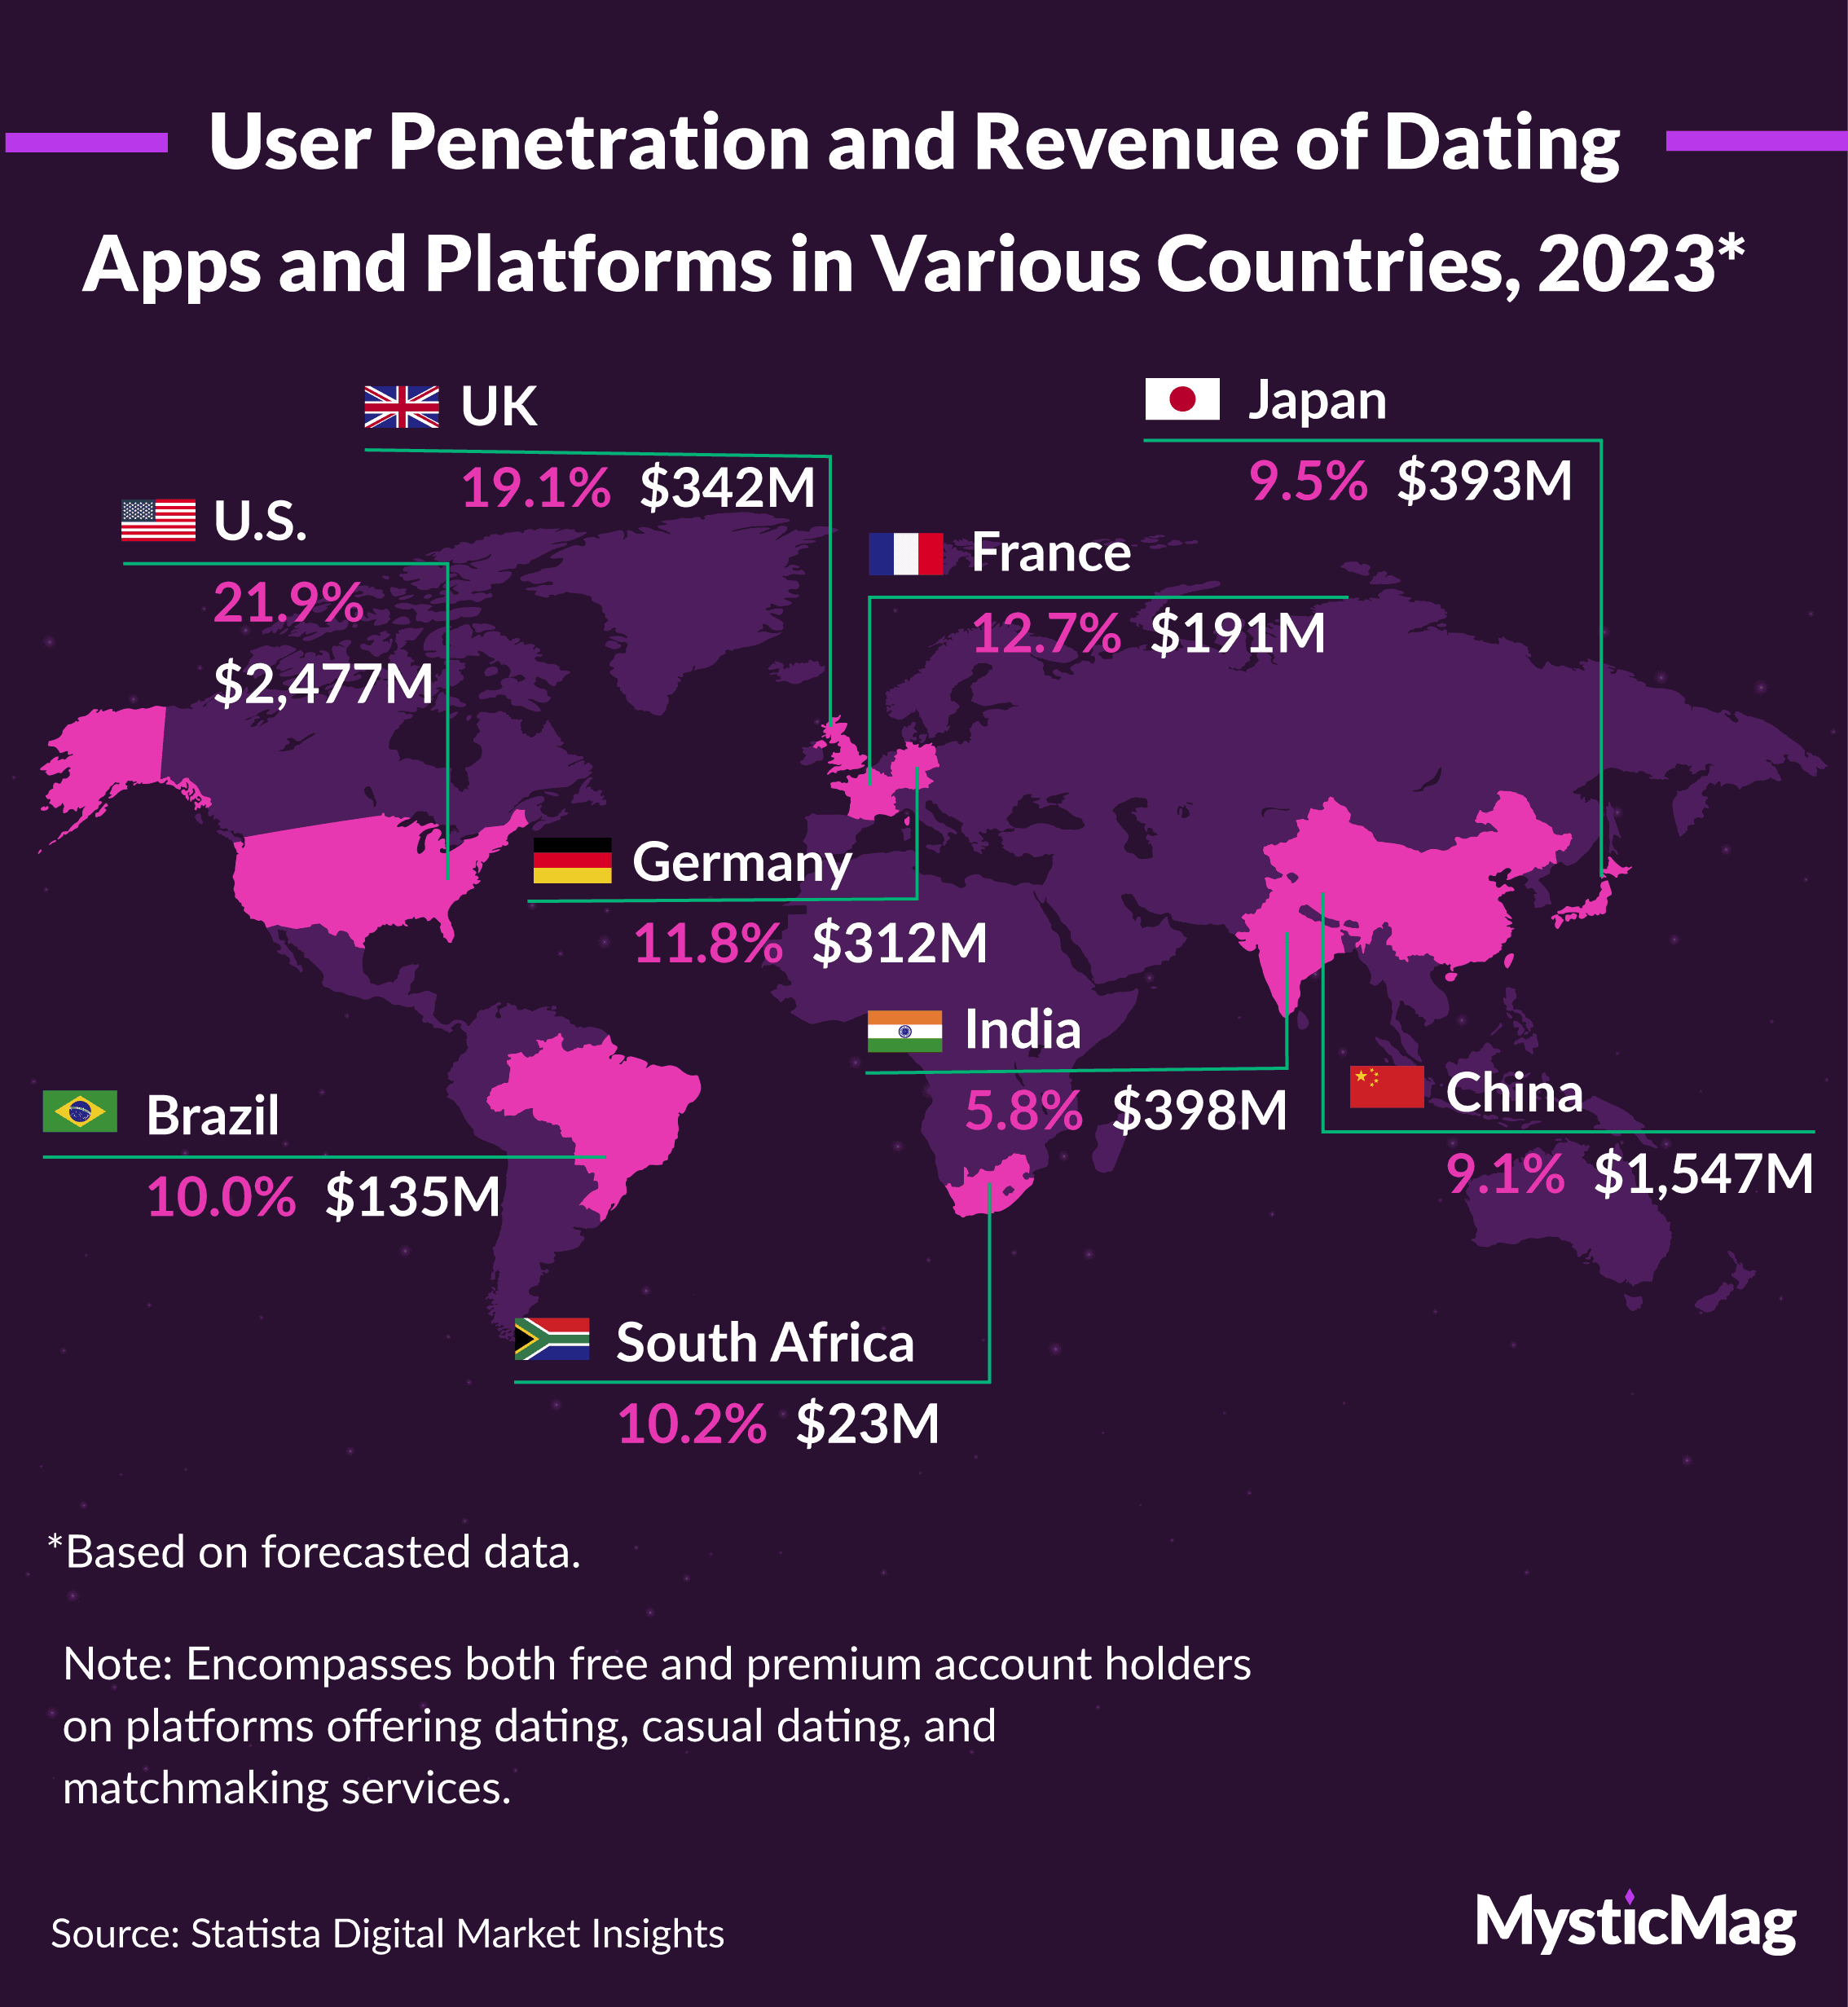 User penetration and revenue of dating apps in each country, 2023